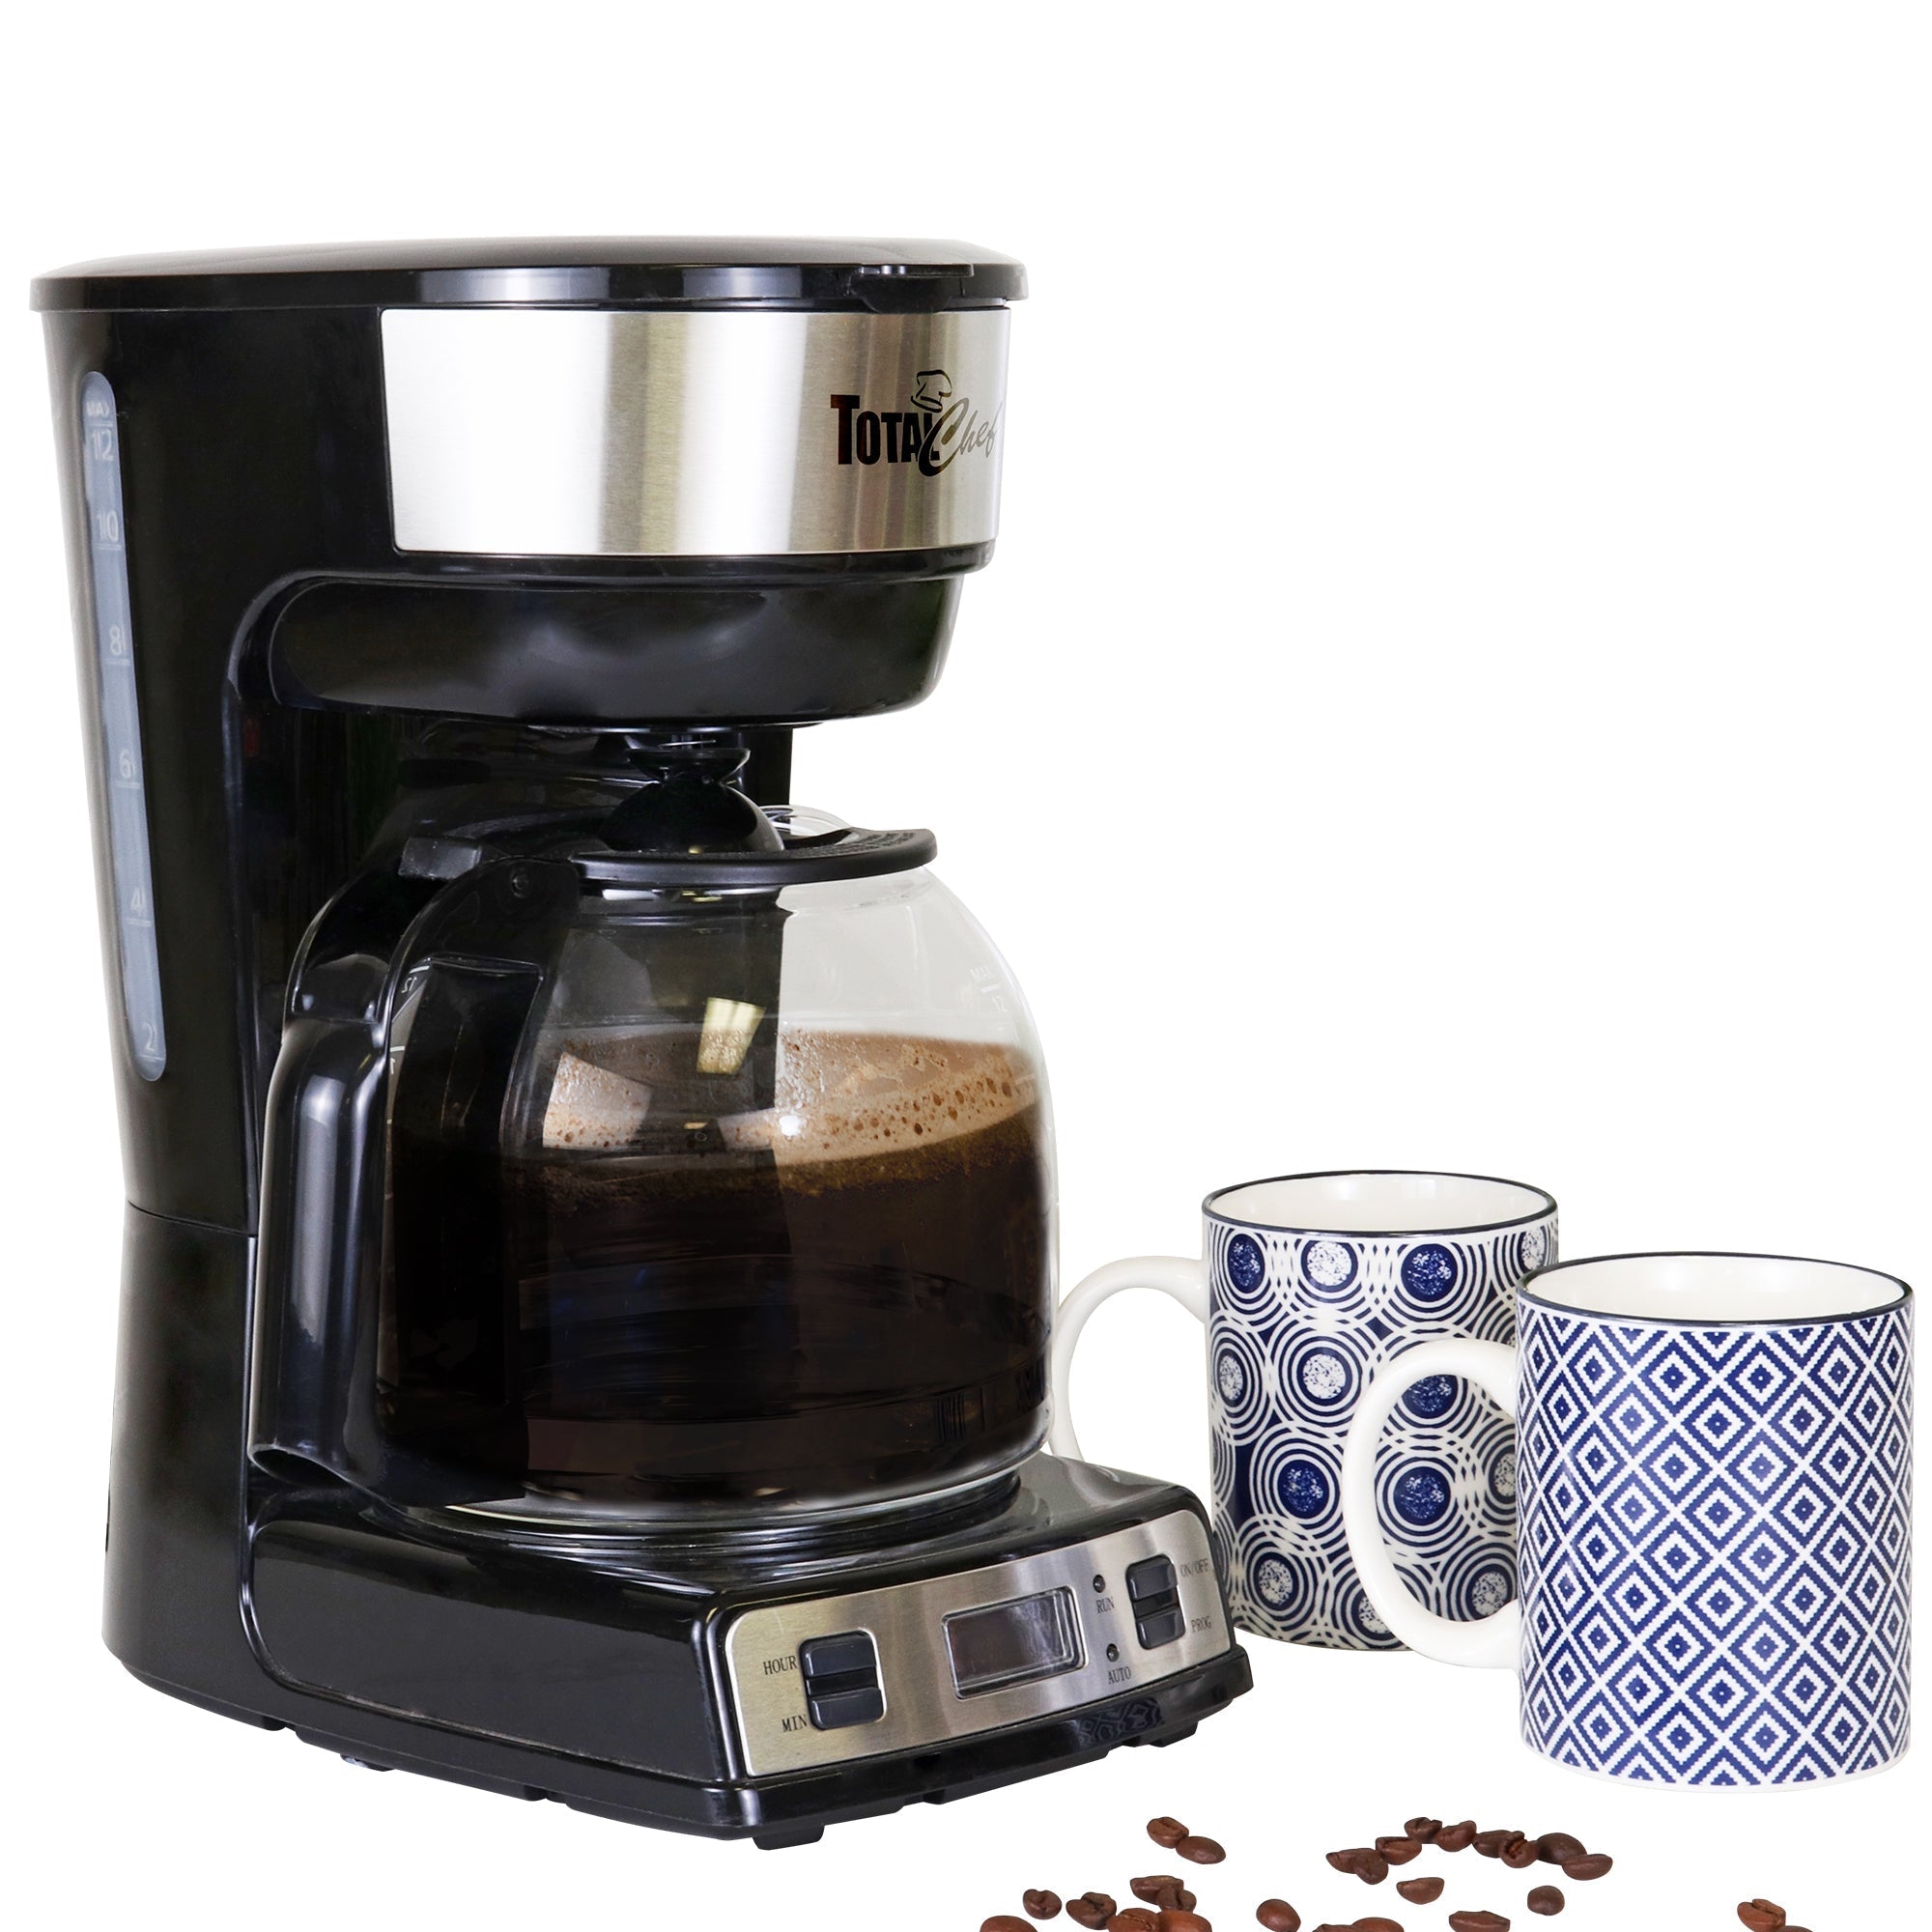 Product shot of coffeemaker with brewed coffee in it and two blue and white mugs beside on a white background